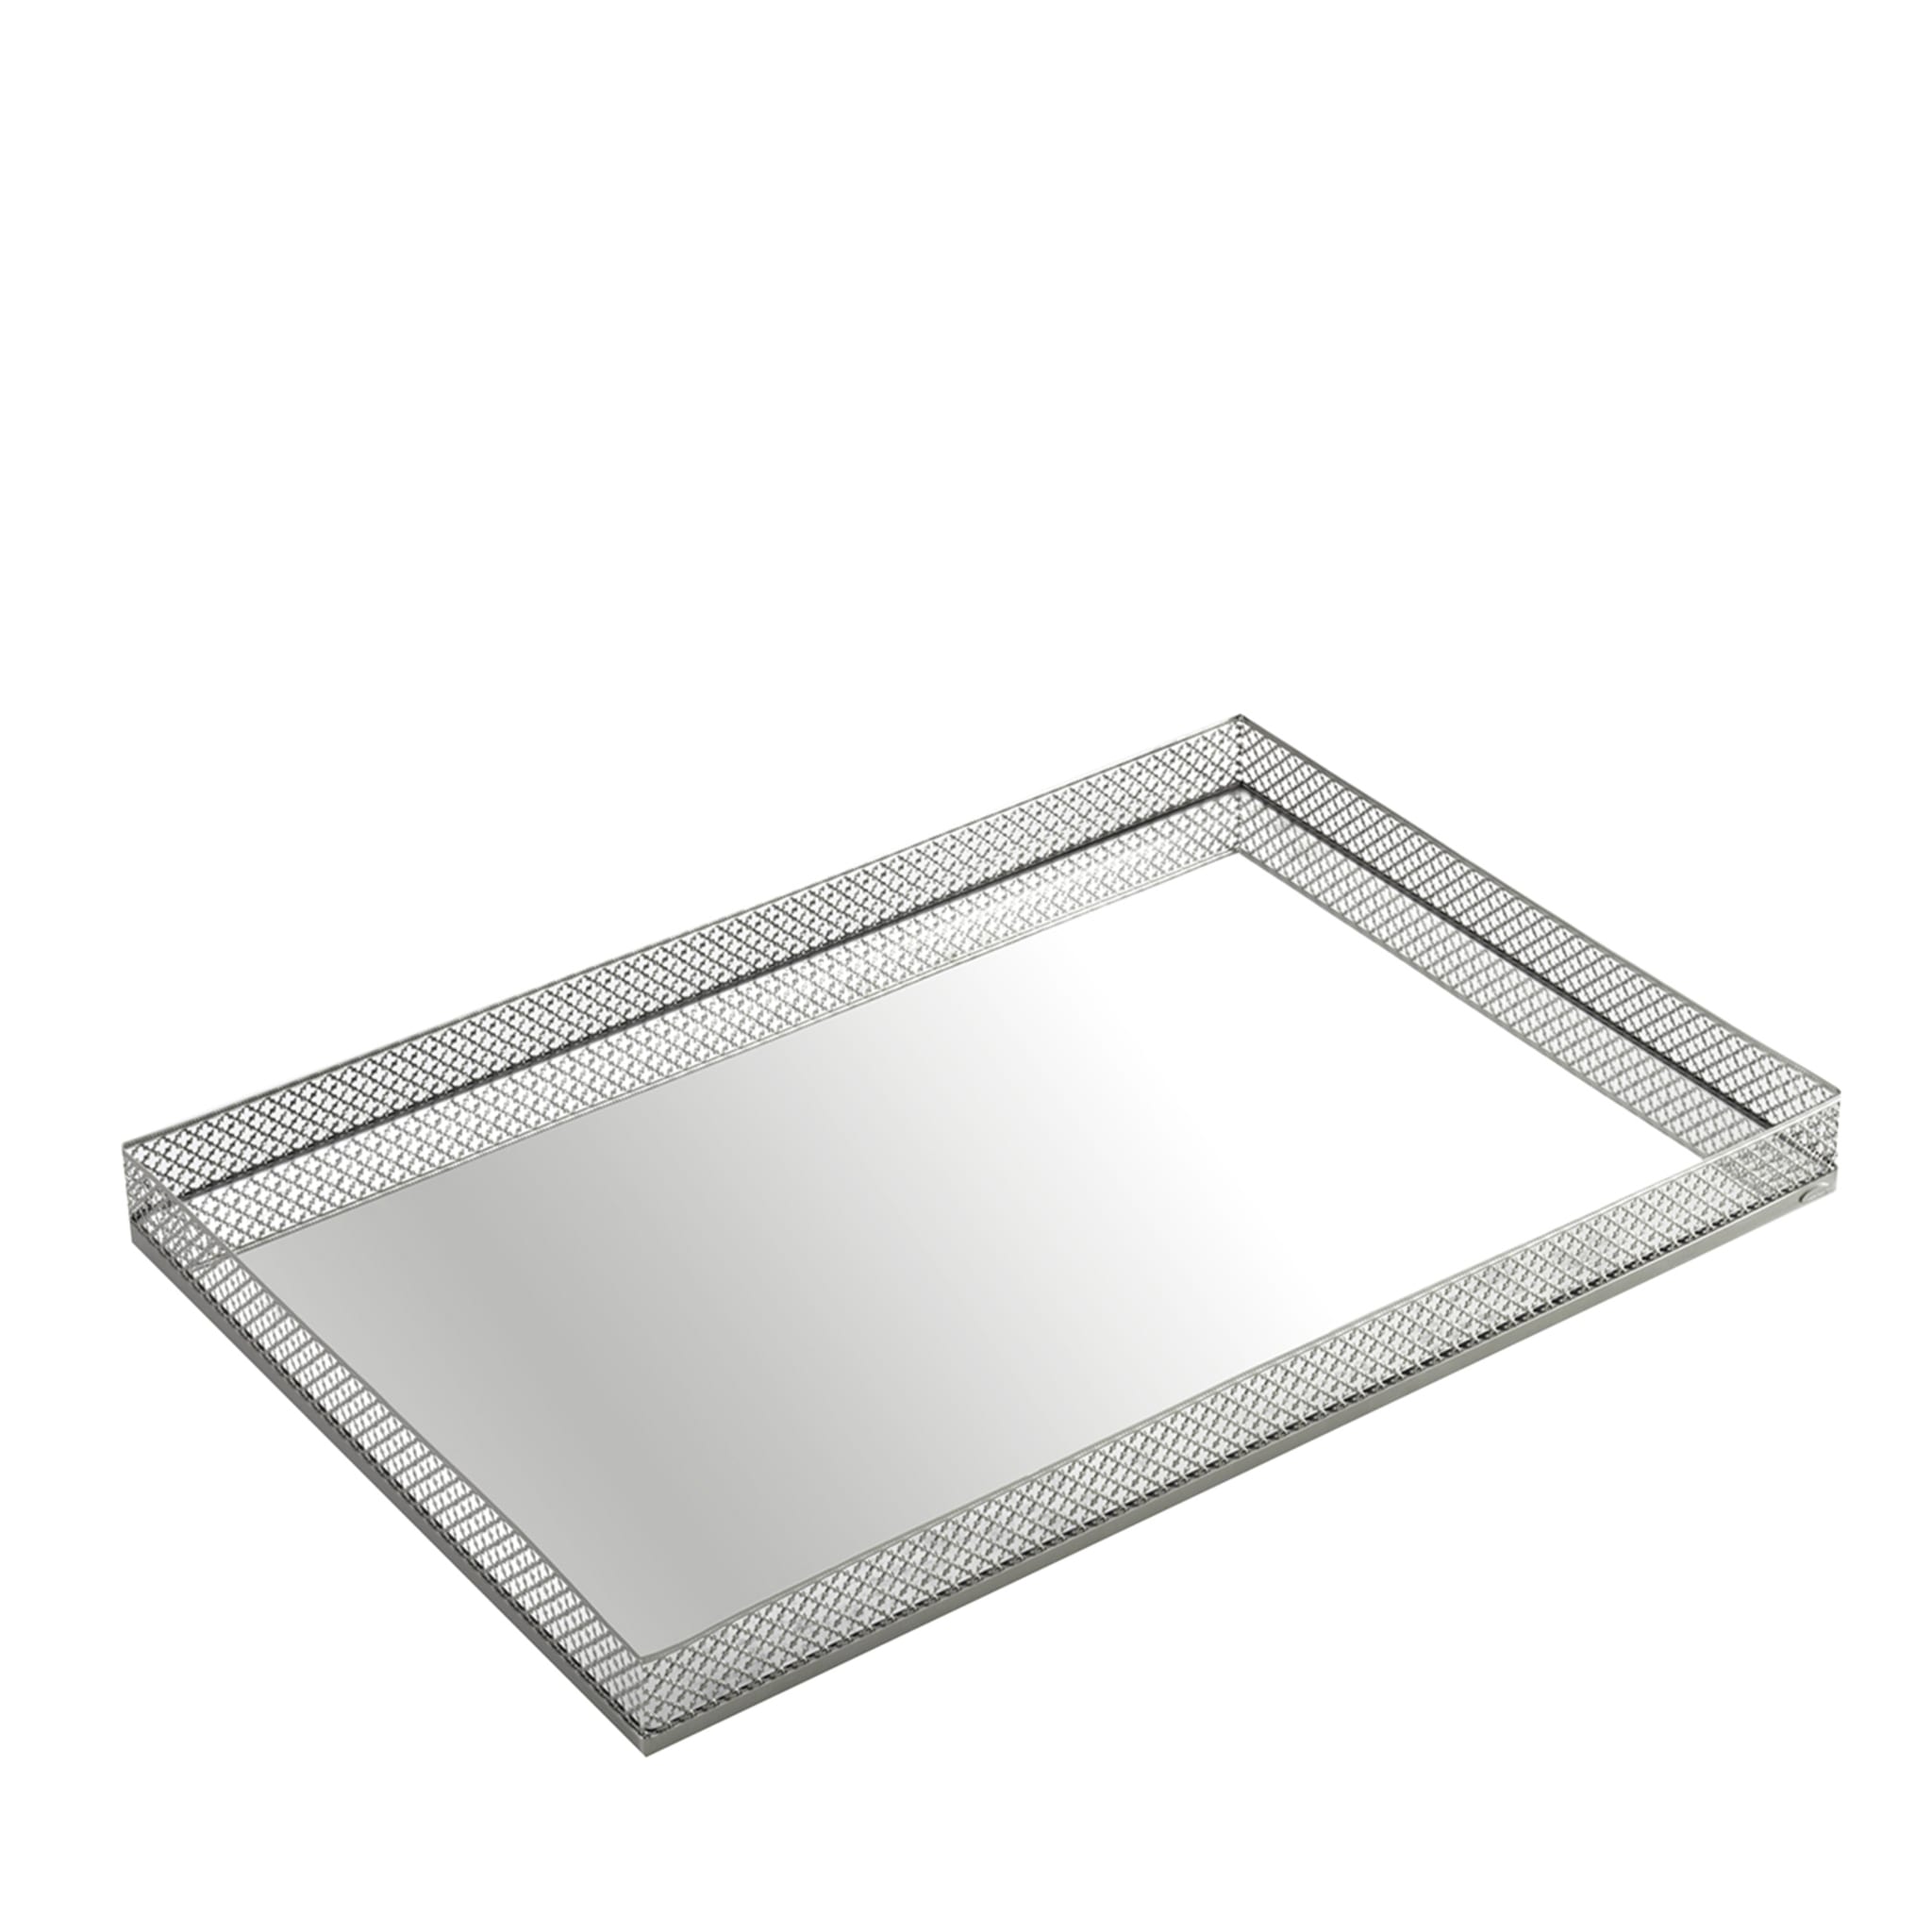 LARGE FIRENZE TRAY - SILVER  - Main view